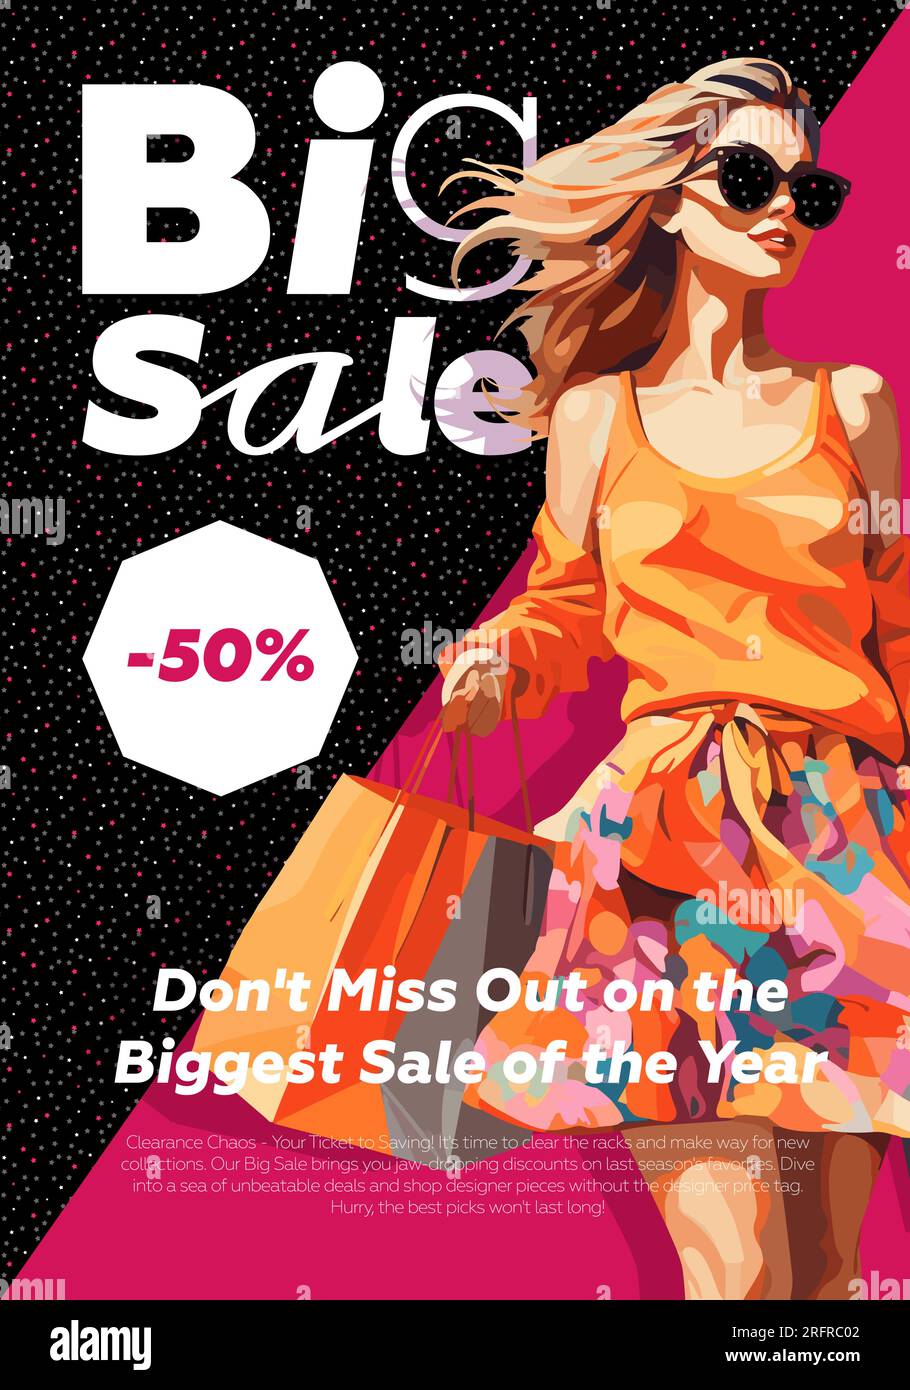 Girls Fashion World Clearance Sale Poster Stock Vector (Royalty Free)  401590861